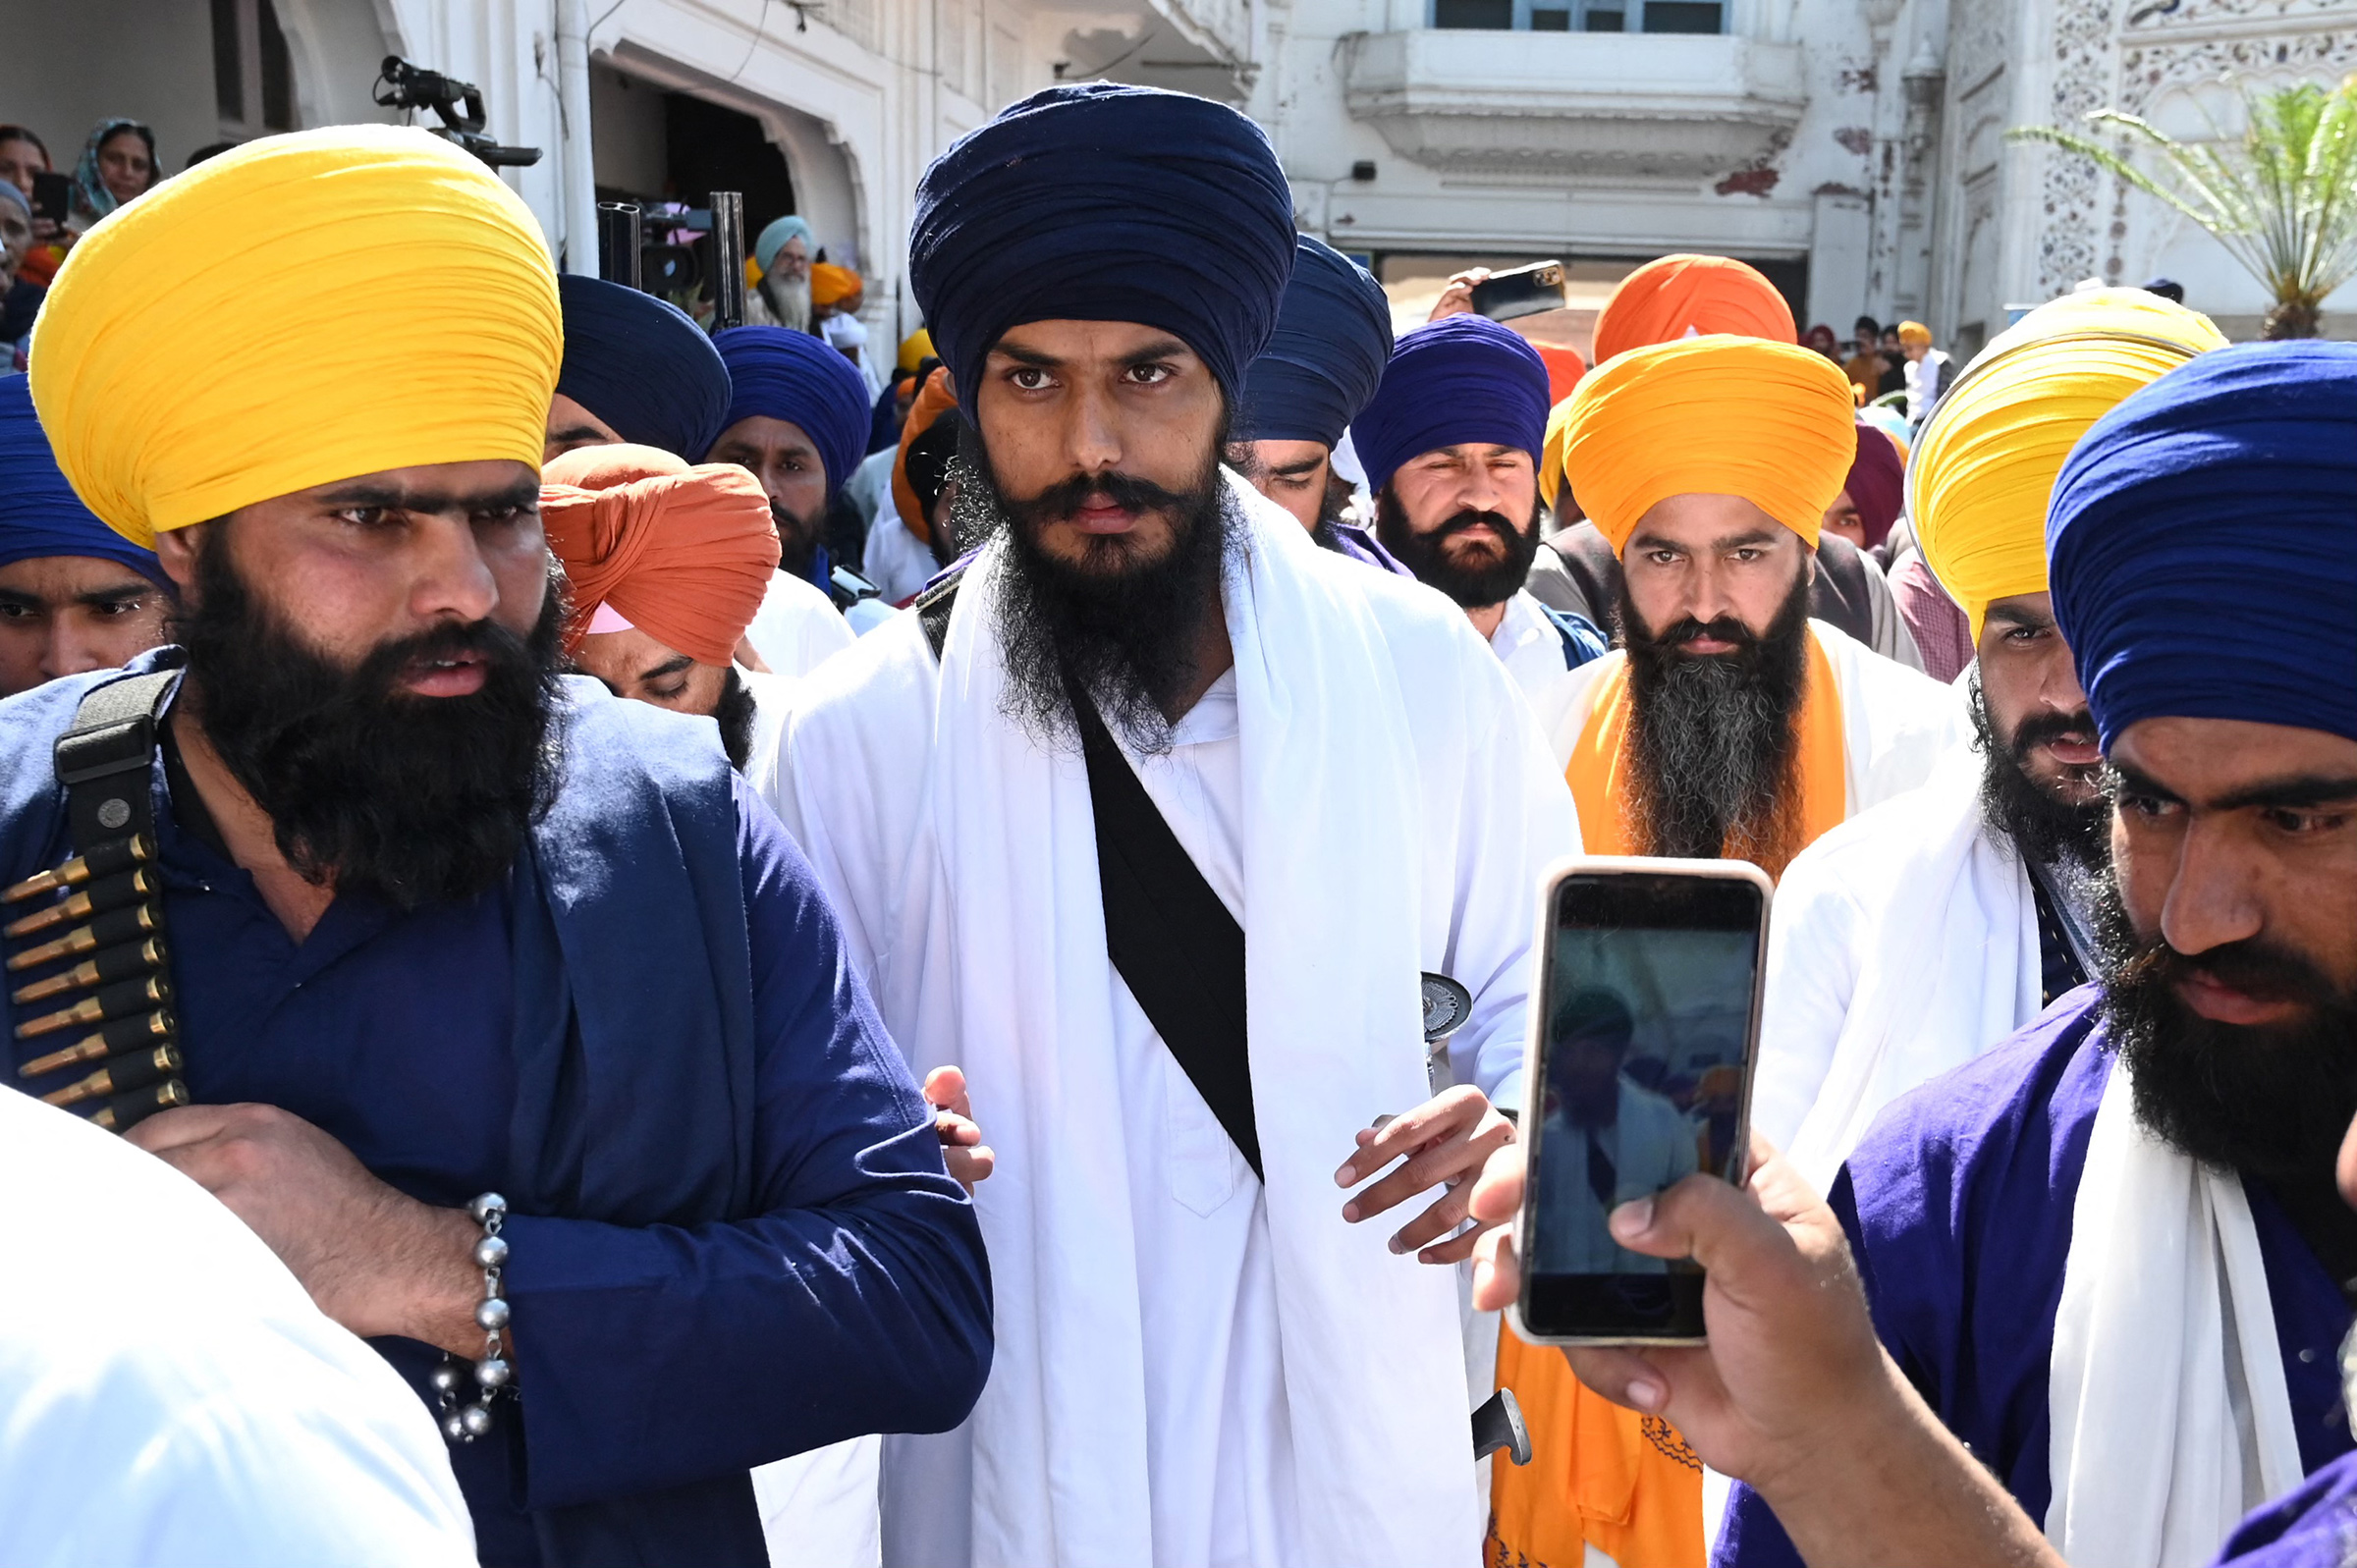 Amritpal Singh, center, pays his respect at the Golden Temple in Amritsar on March 3. (Narinder Nanu—AFP/Getty Images)